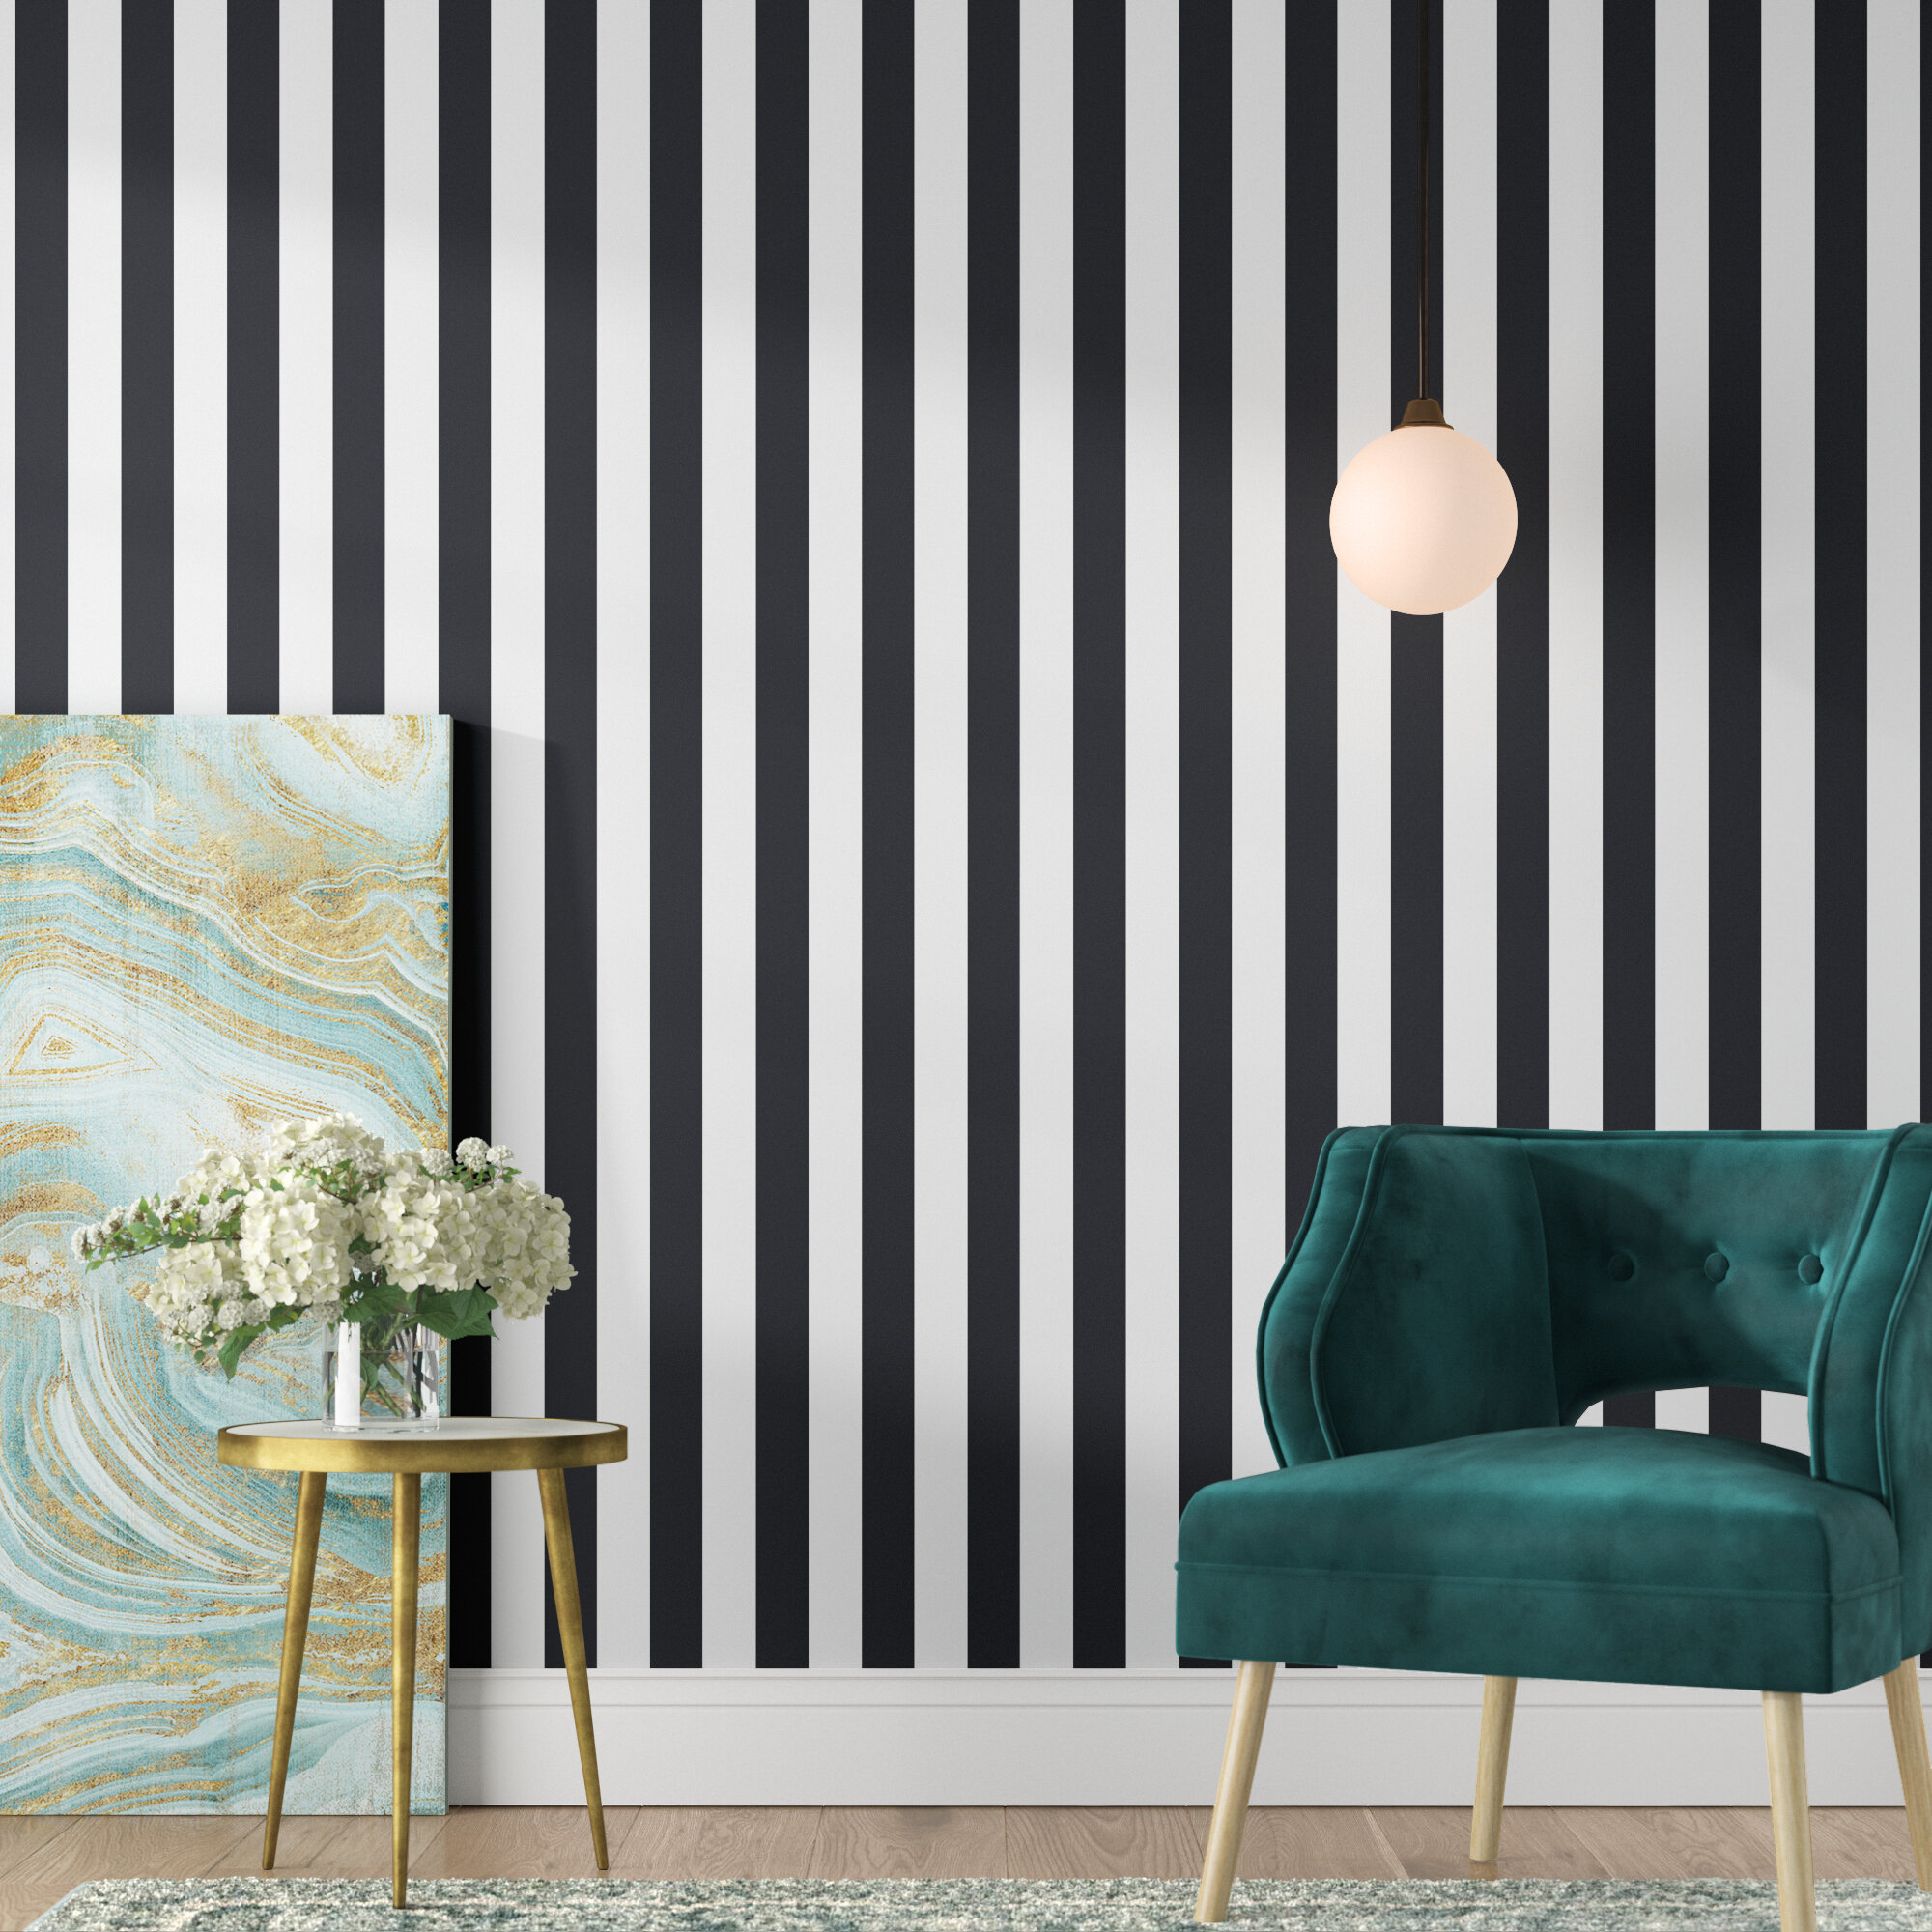 Self-adhesive Peel and STICK Striped Stripes Wallpaper Roll Simple Style